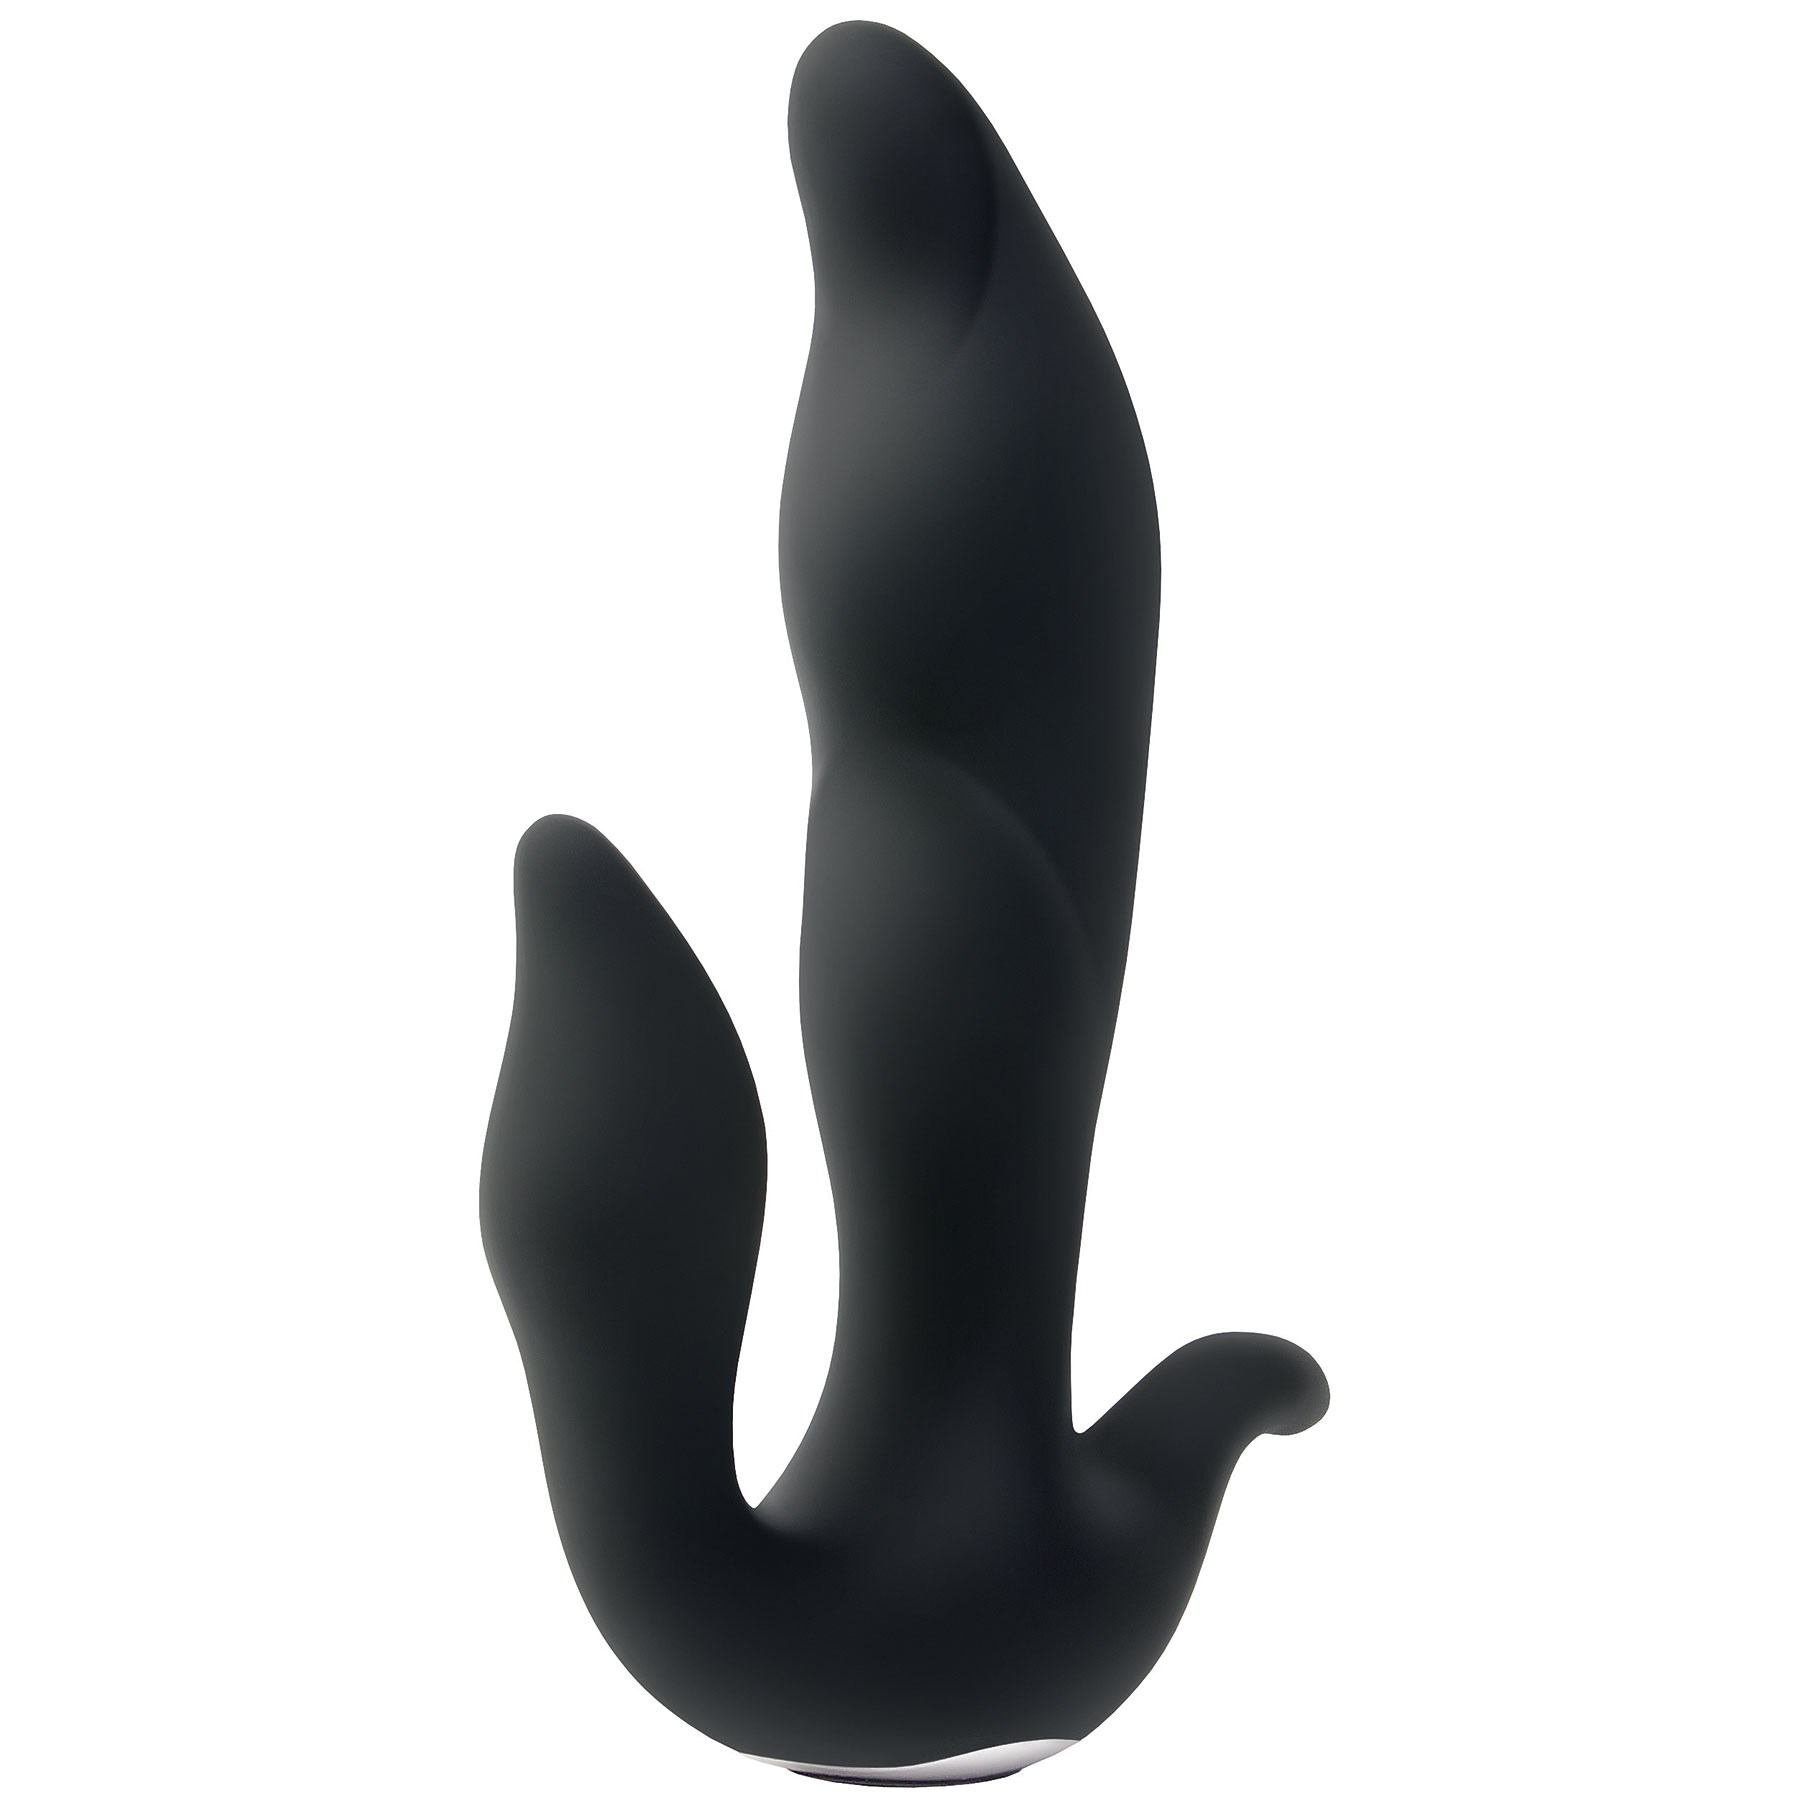 Adam & Eve 3 Point Prostate Massager showing tips